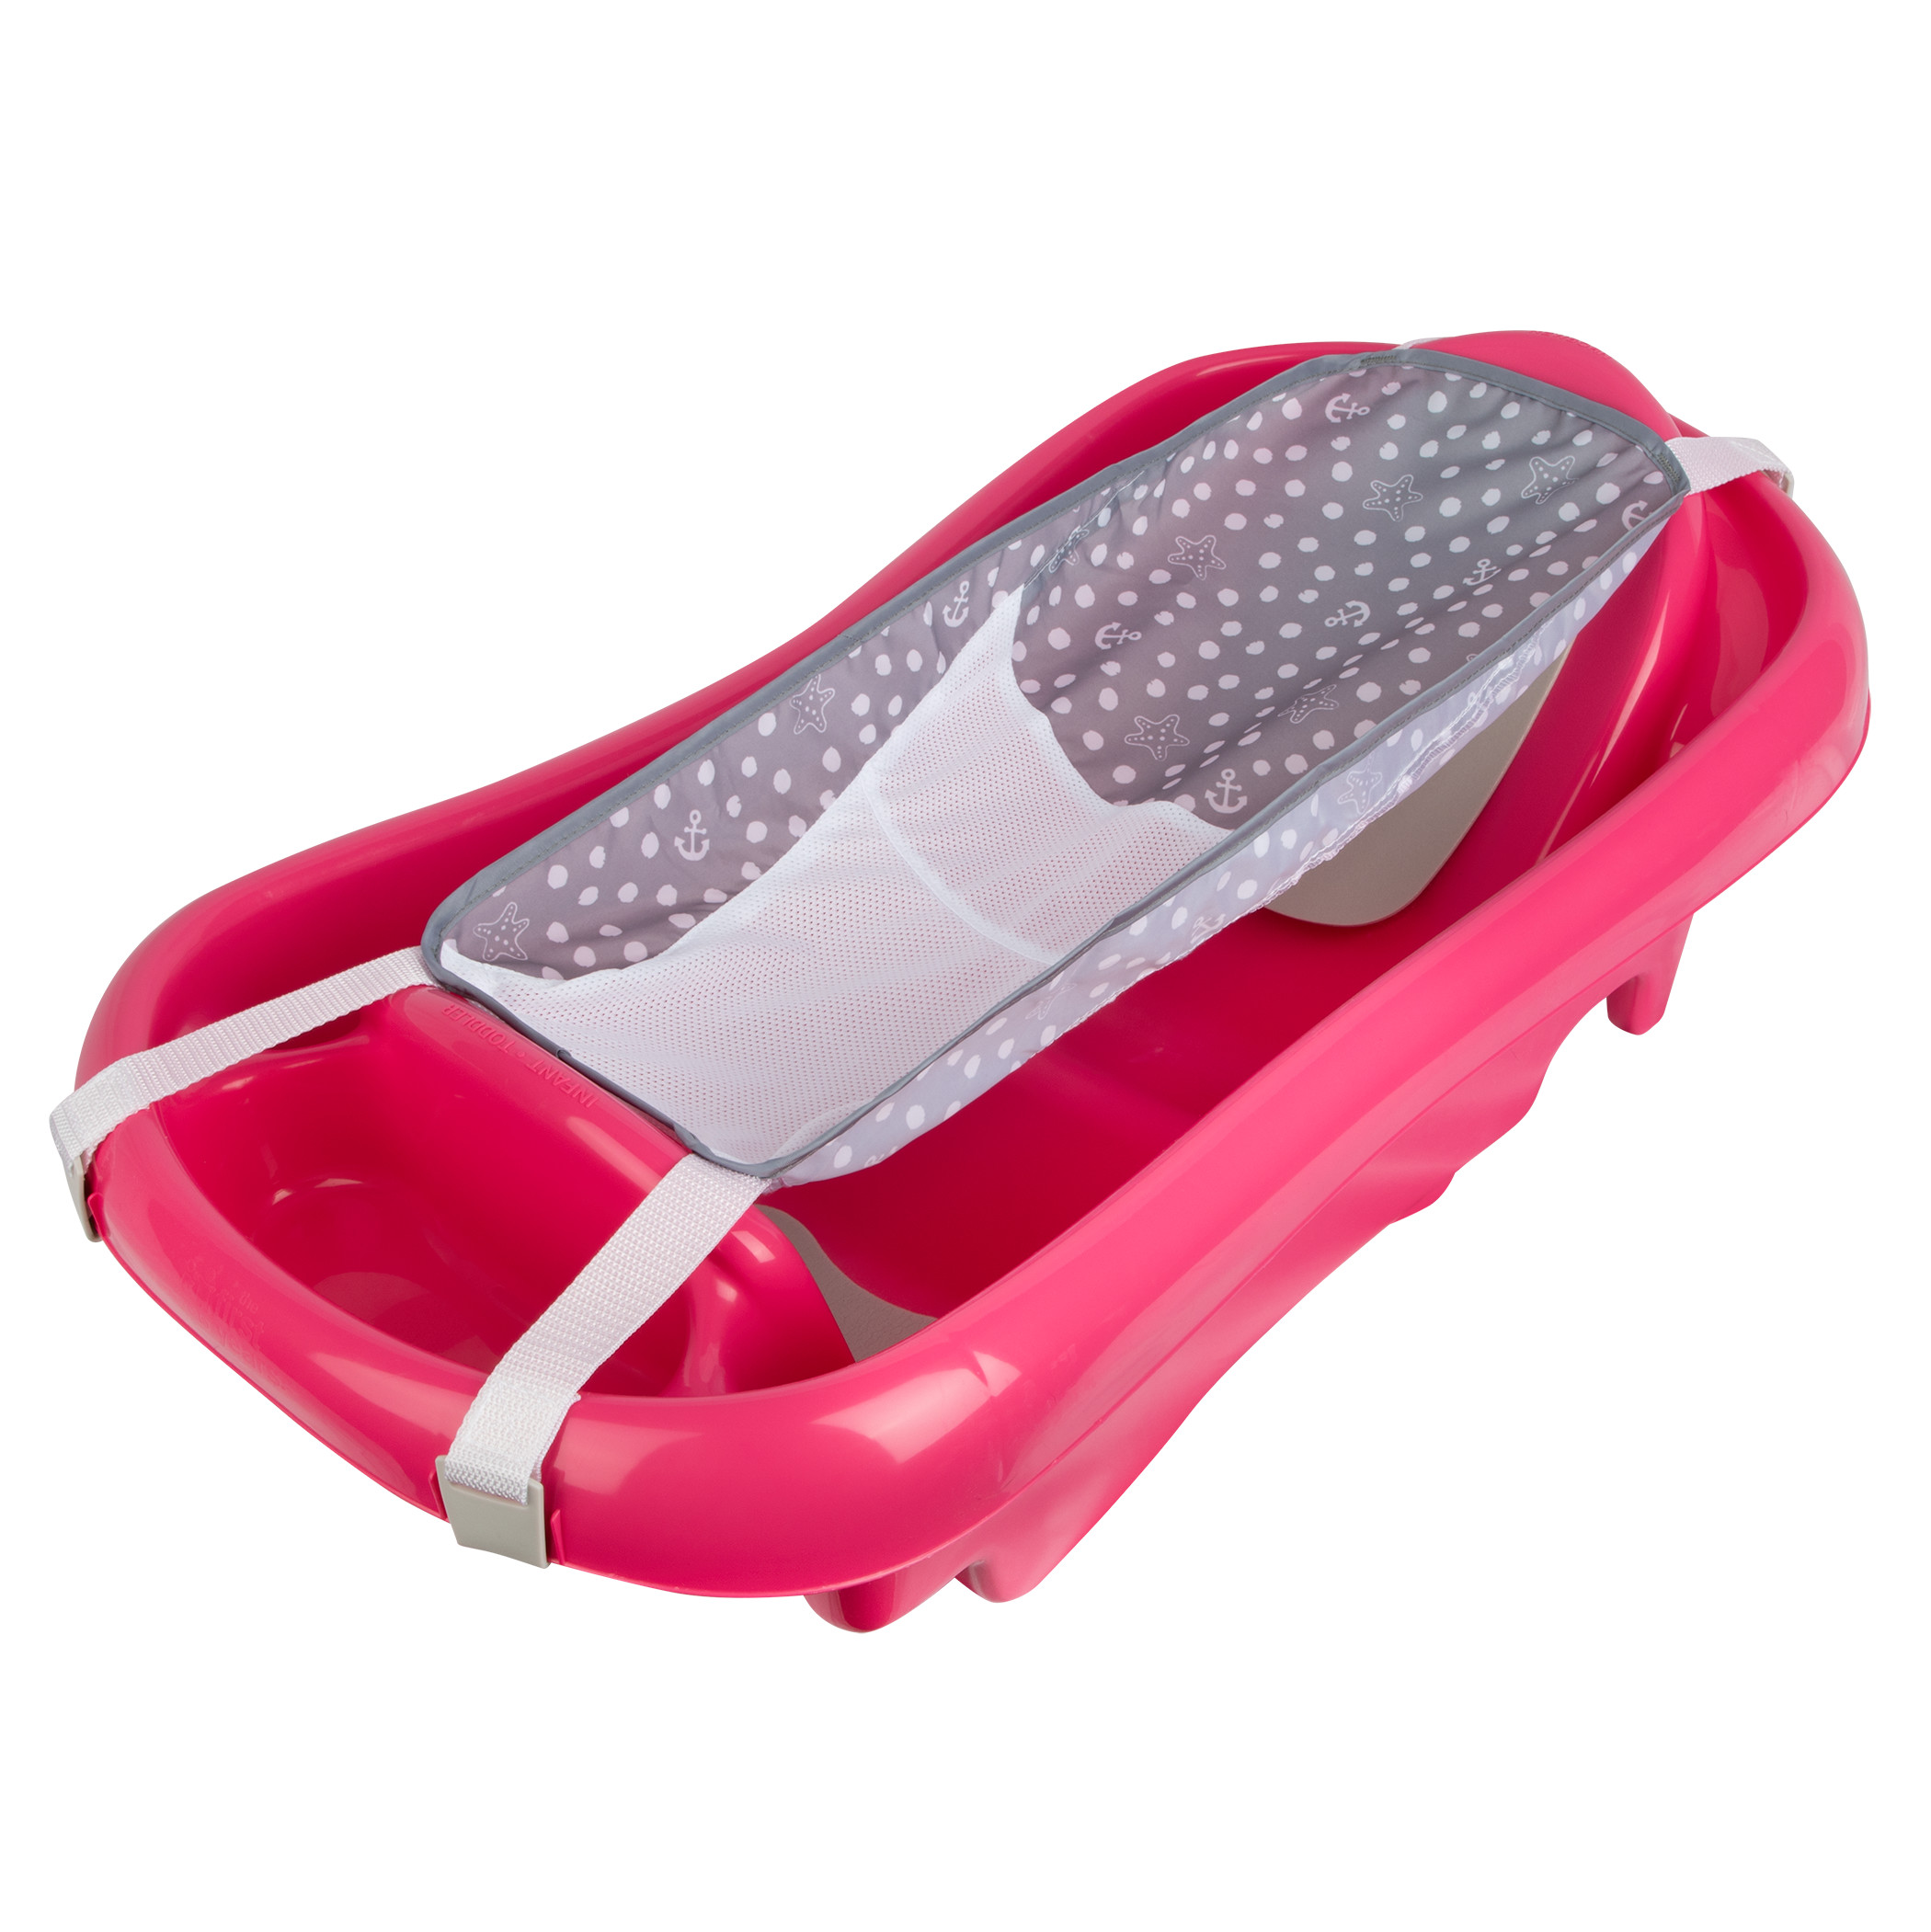 The First Years Y7135 Sure Comfort Deluxe Newborn To Toddler Tub Pink - image 1 of 7